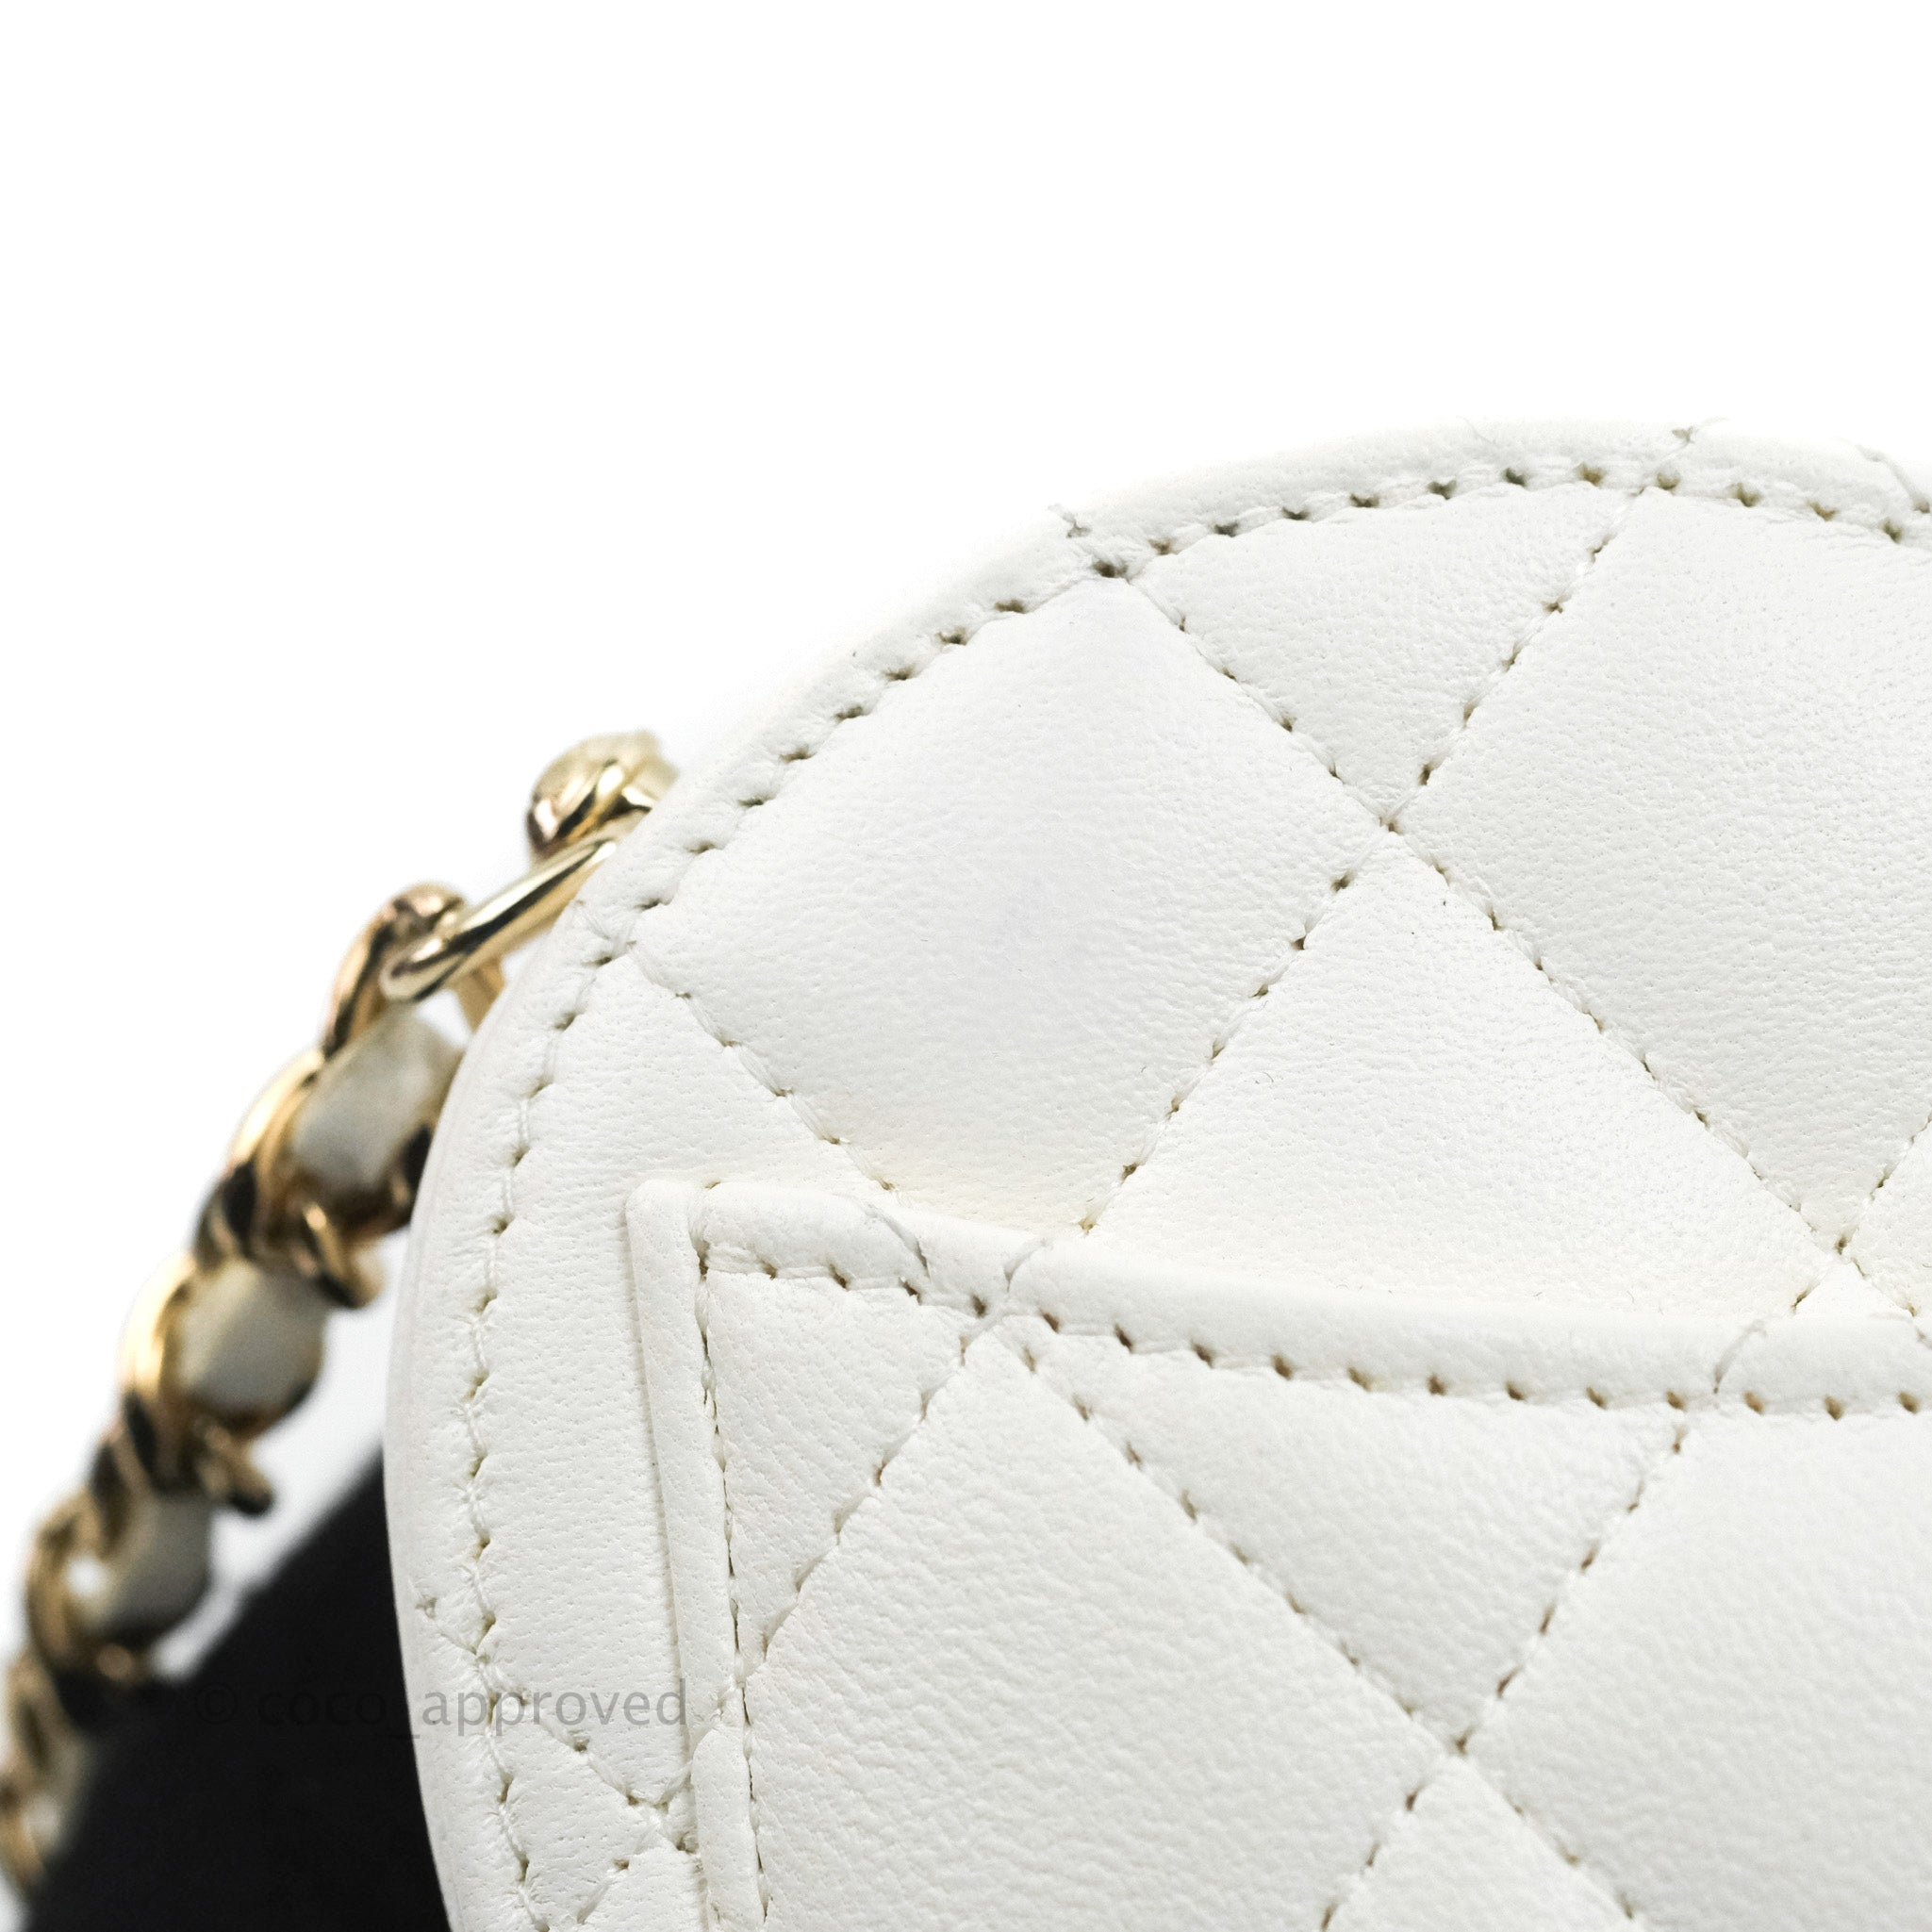 Chanel Small Heart Bag White Lambskin Gold Hardware 22S – Coco Approved  Studio